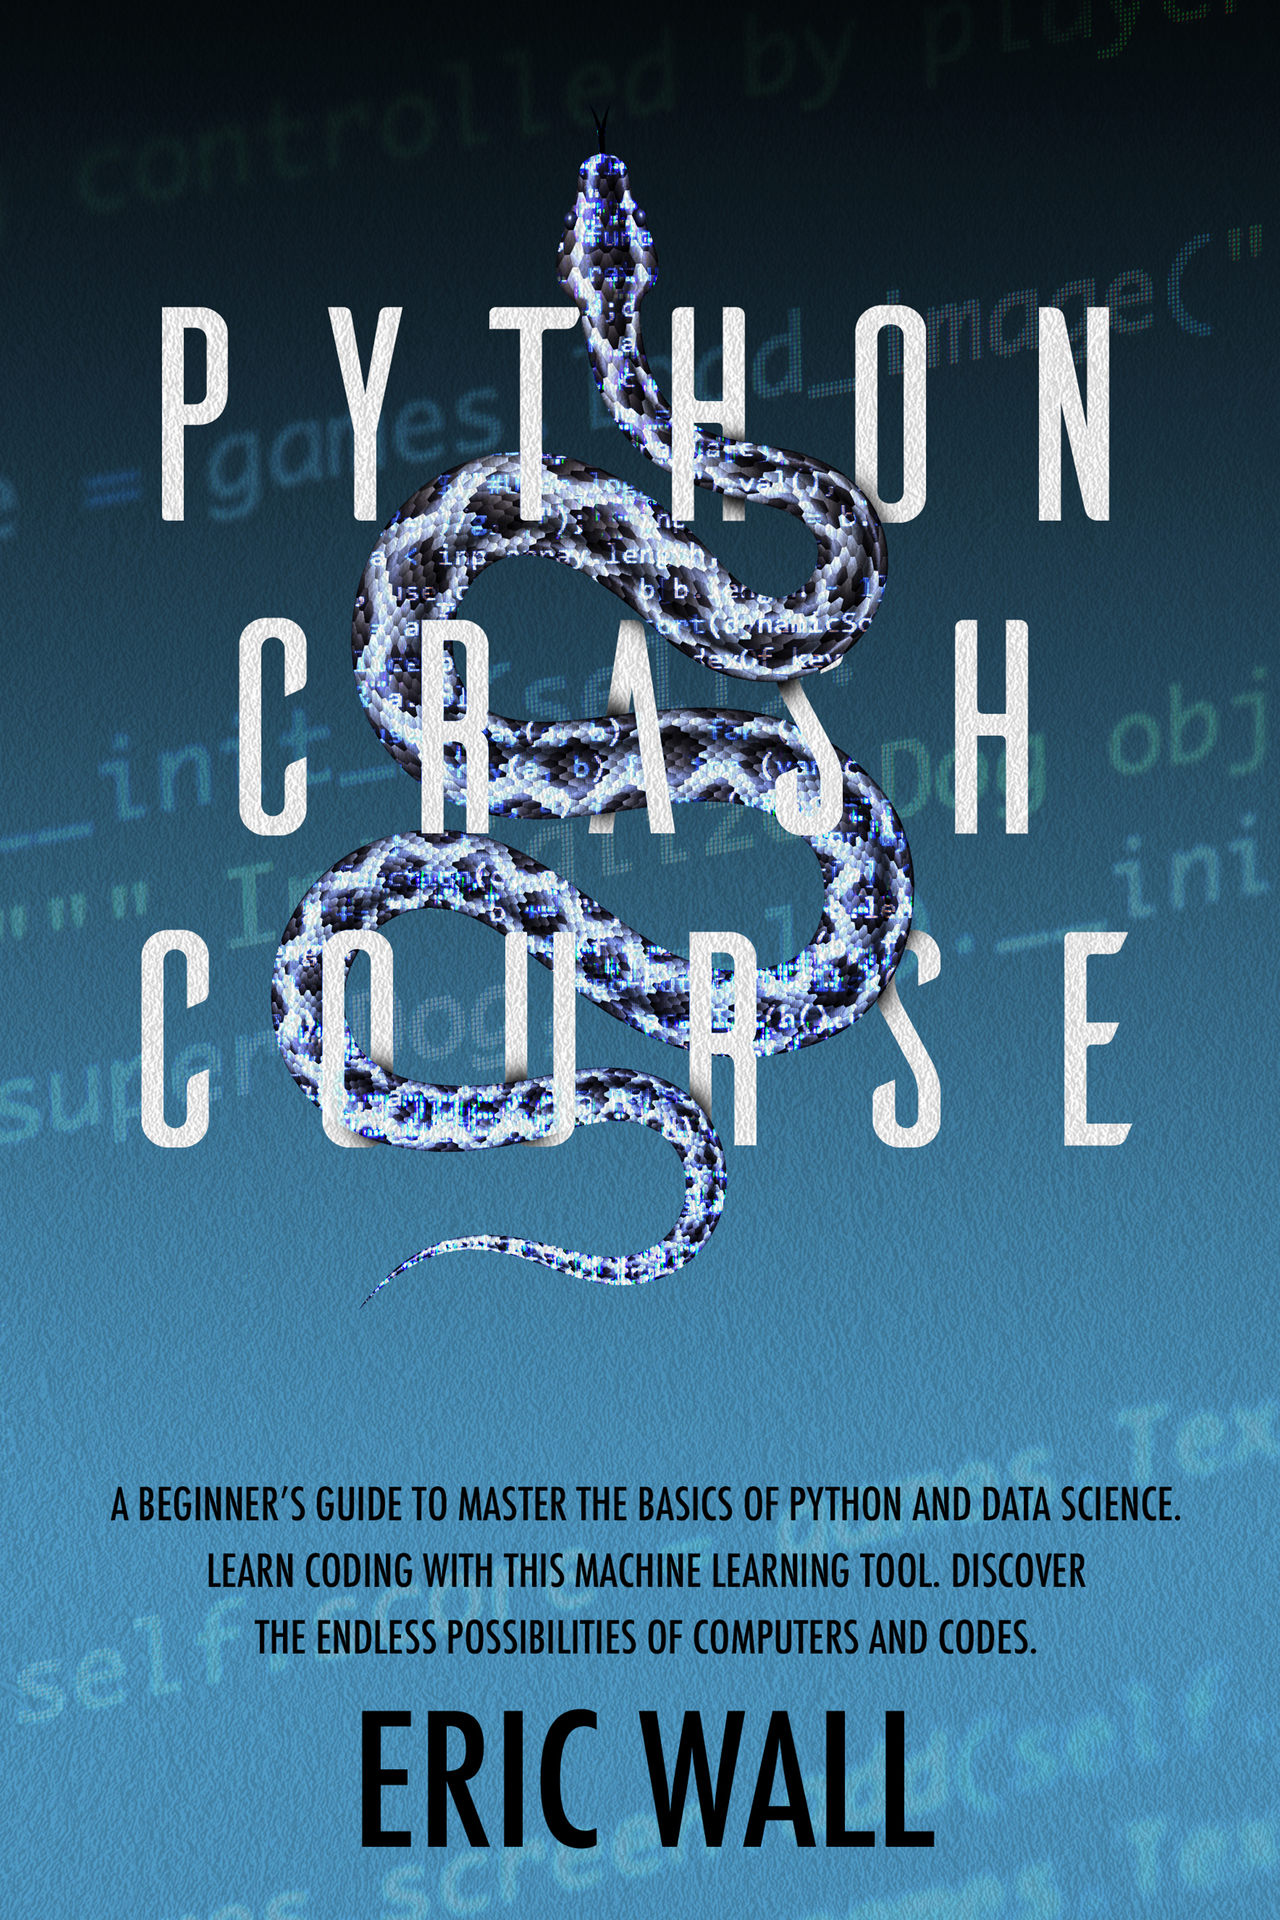 Python Crash Course: A Beginner’s Guide to Master the Basics of Python and Data Science. Learn Coding With This Machine Learning Tool. Discover the Endless Possibilities of Computers and Codes.